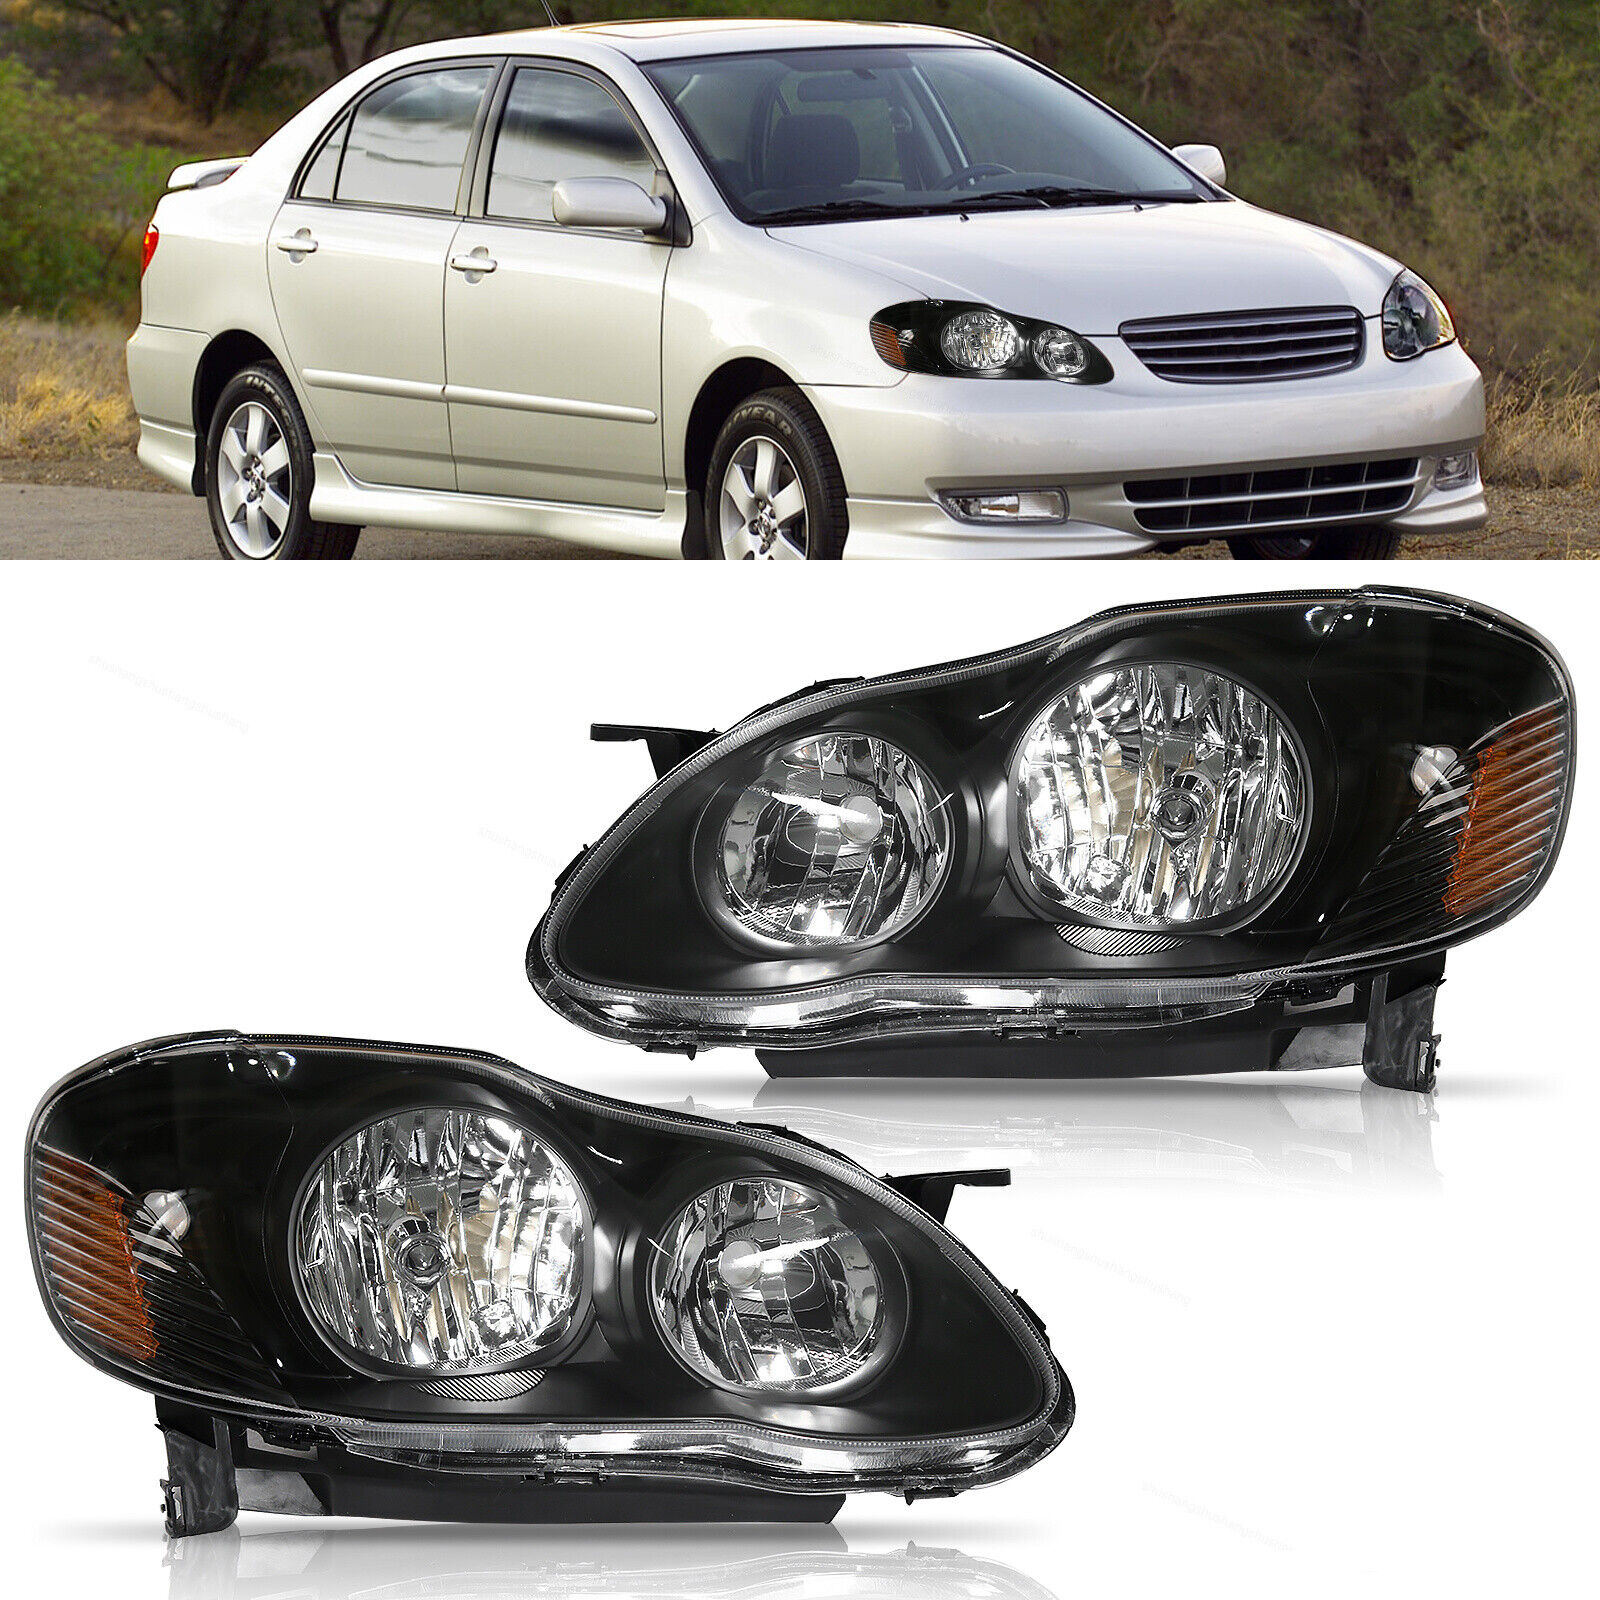 For 2003-2008 Toyota Corolla Front Left and Right Headlights Halogen Lamps Black